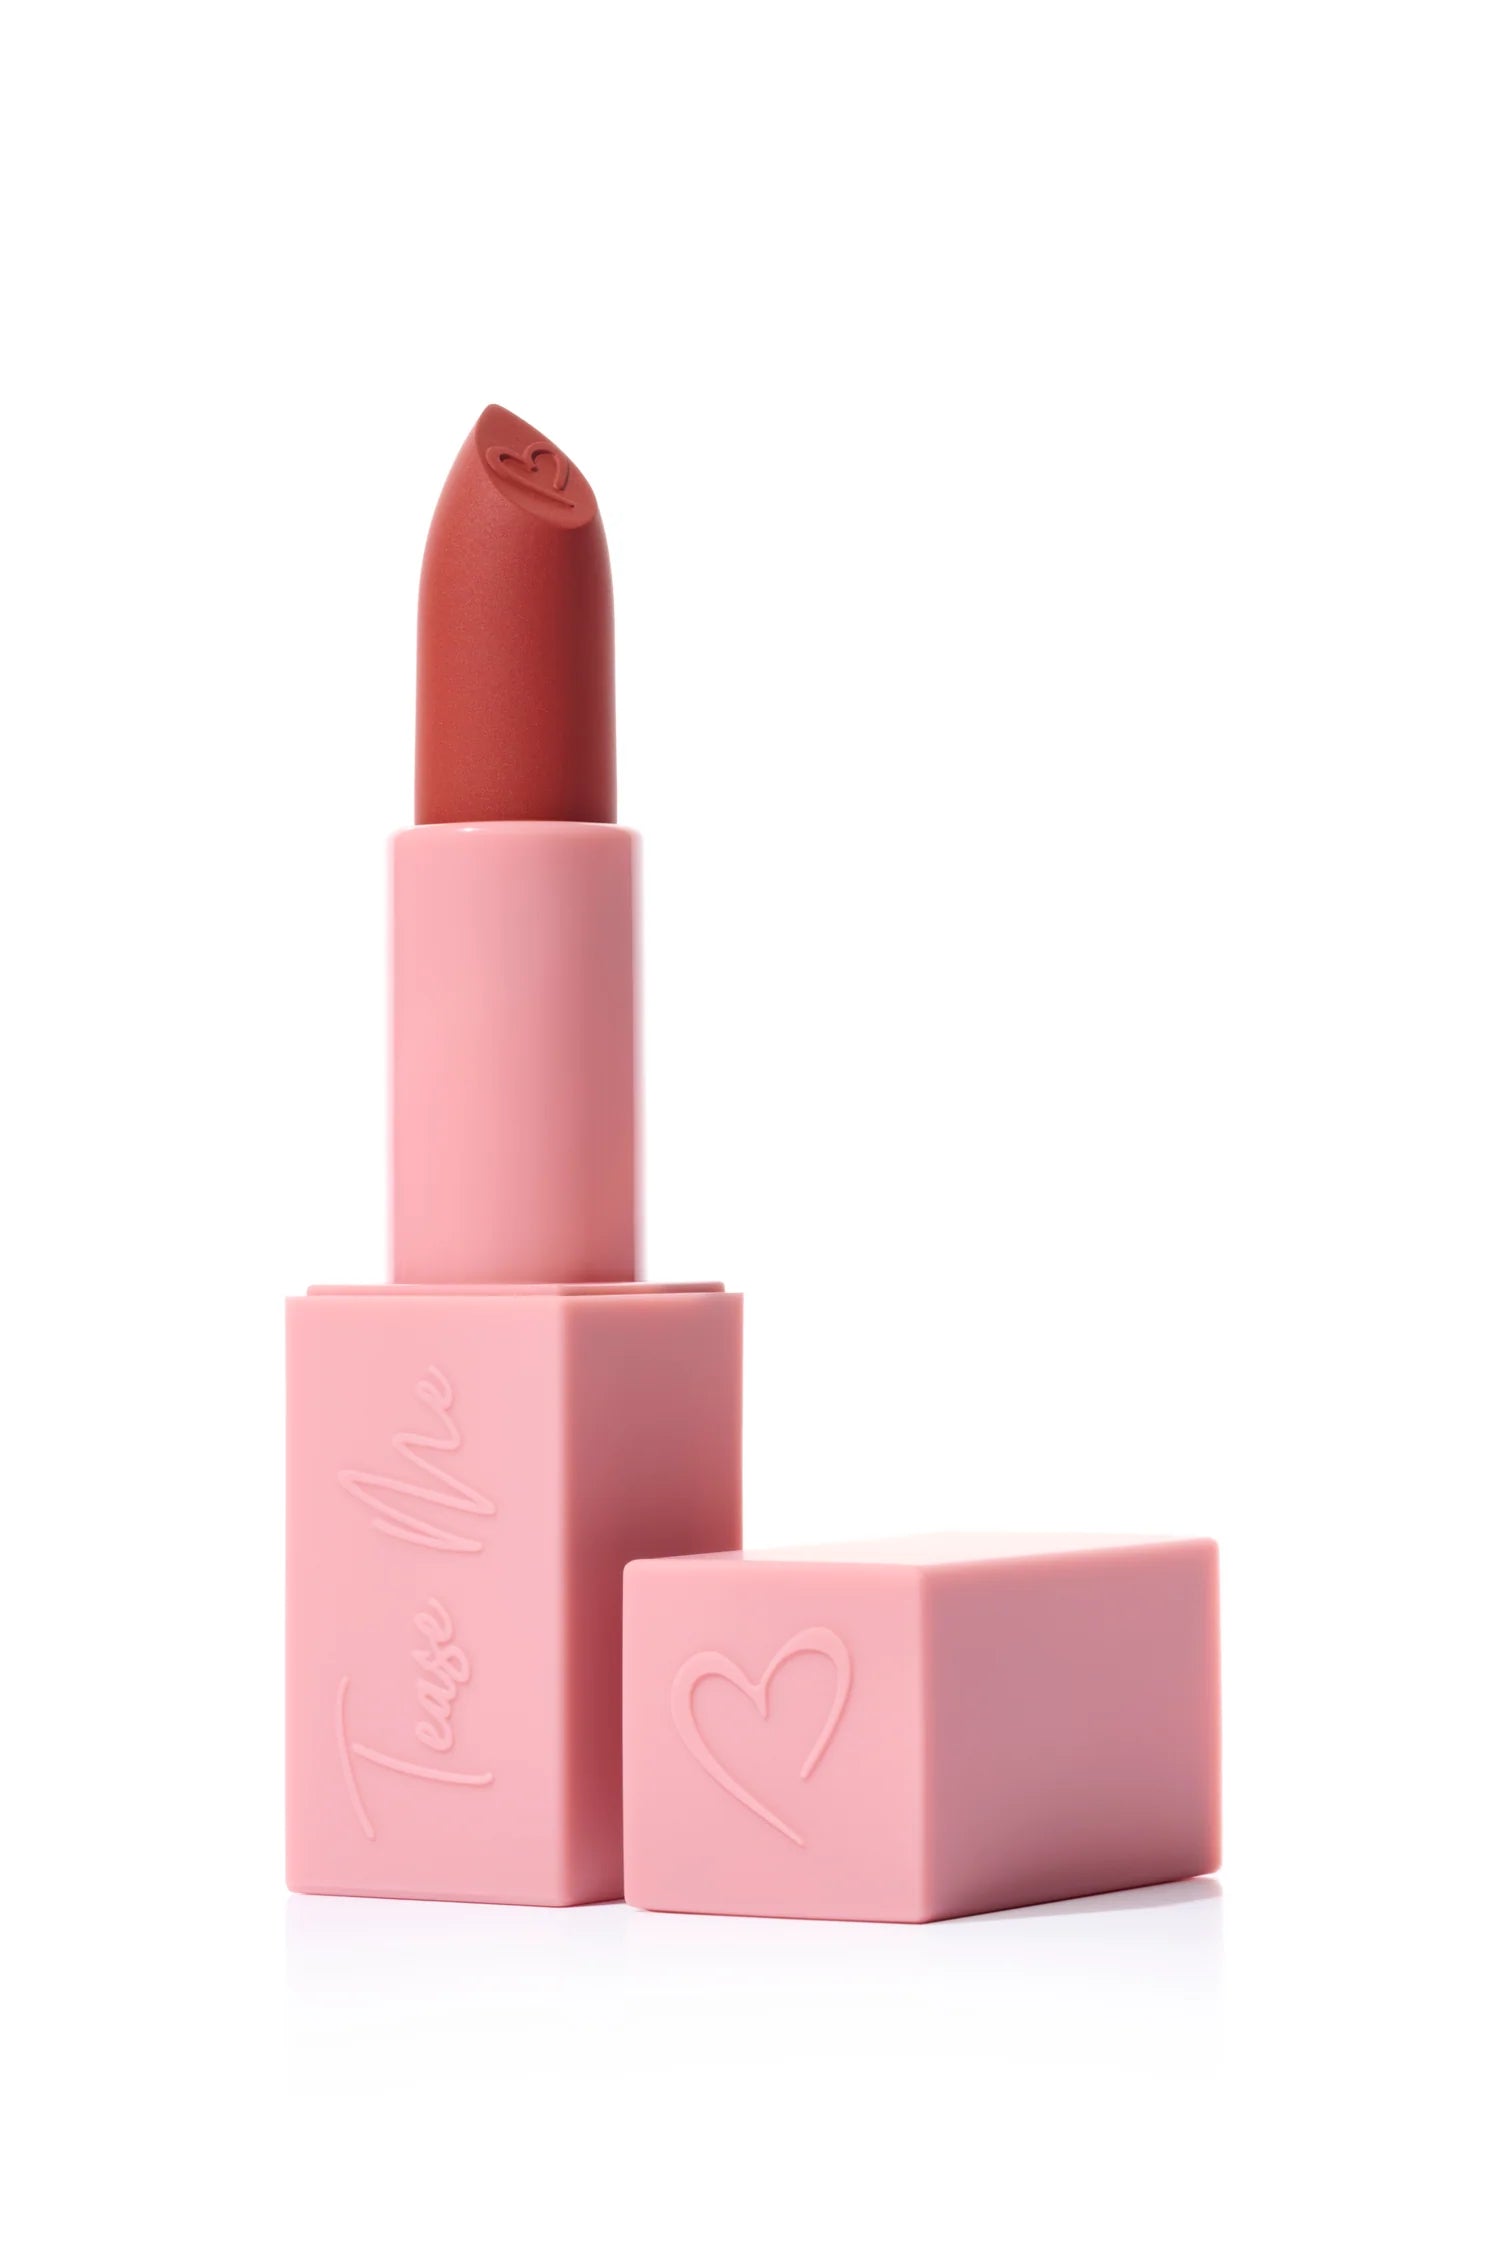 Beauty Creations - Tease Me Collection Lipstick - Spice It Up